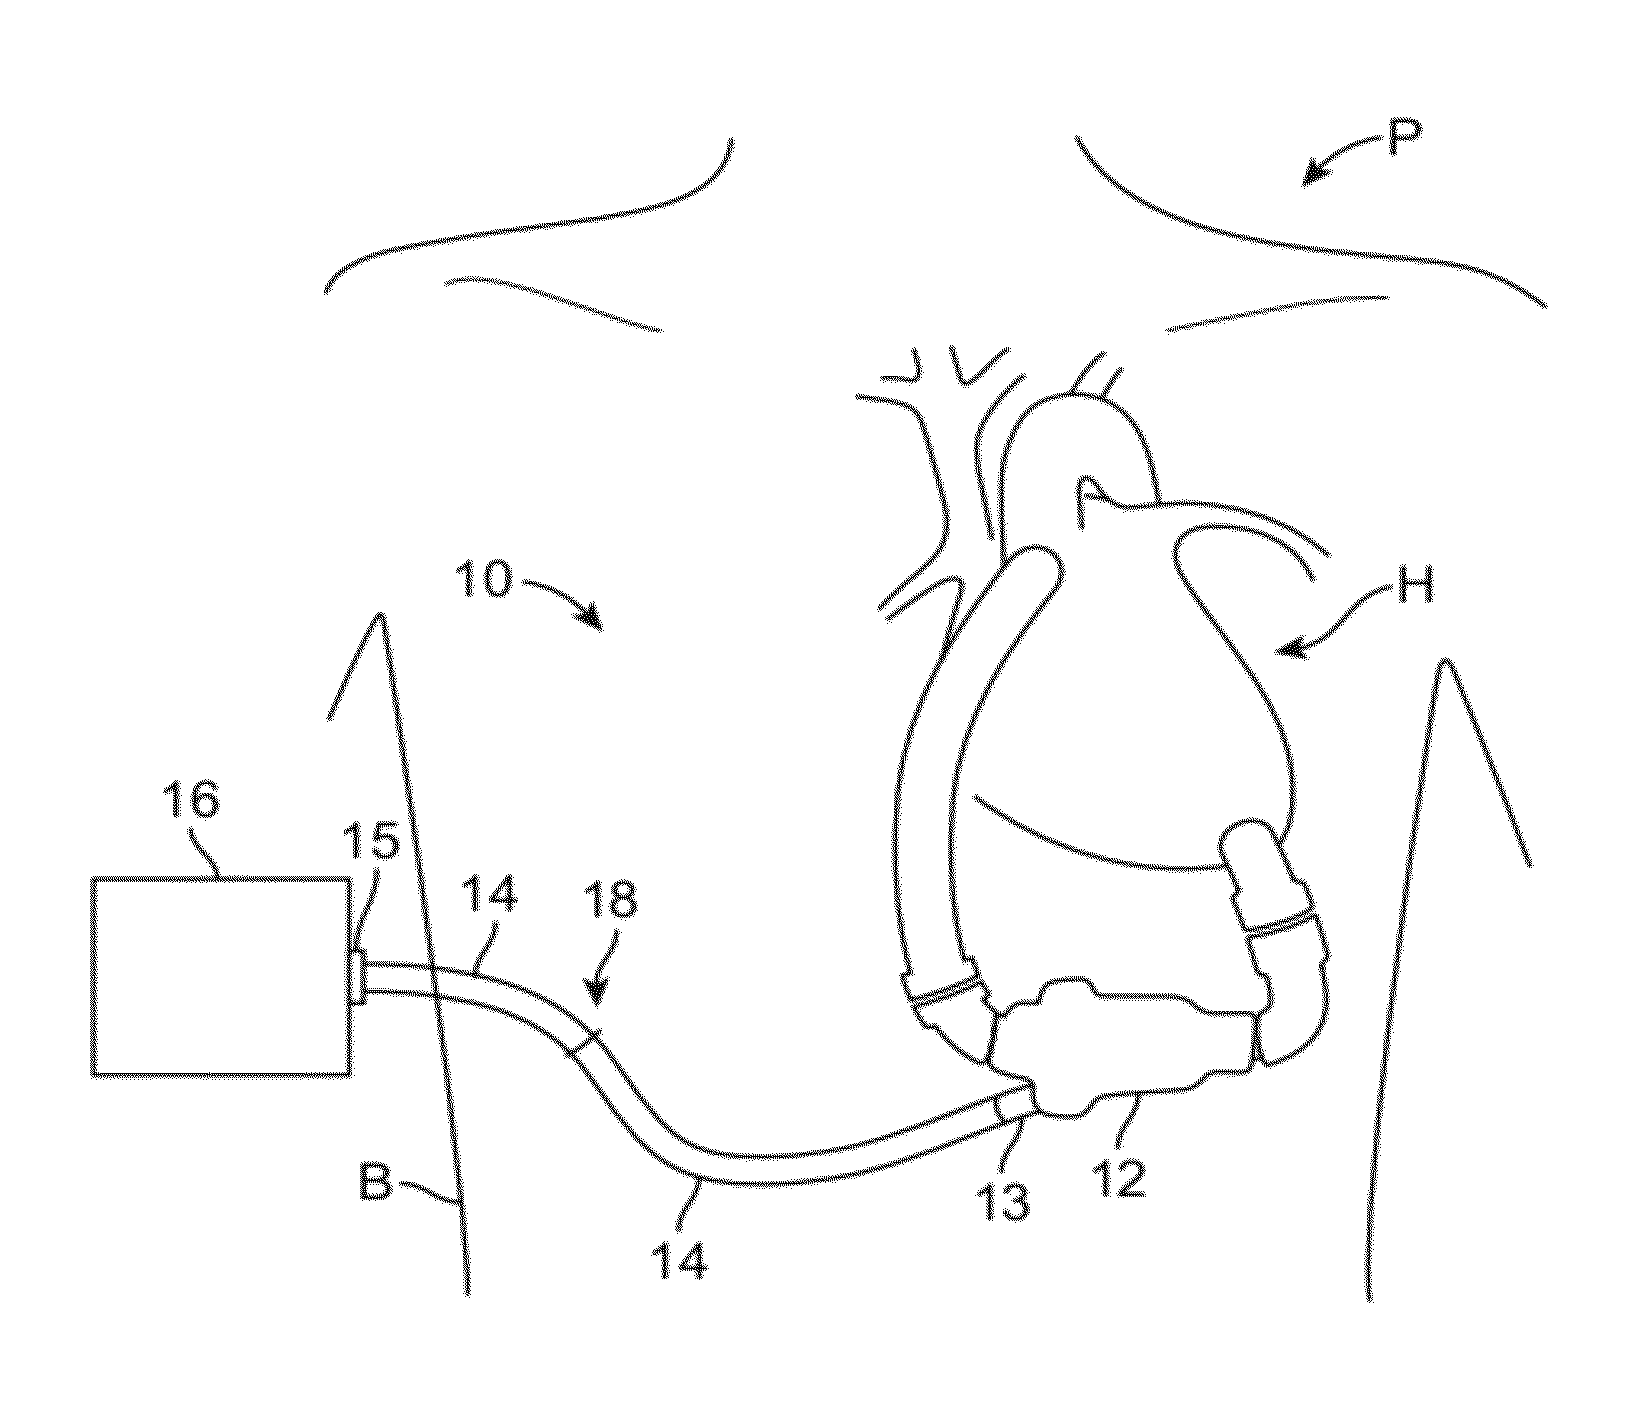 Assembly and method for stabilizing a percutaneous cable